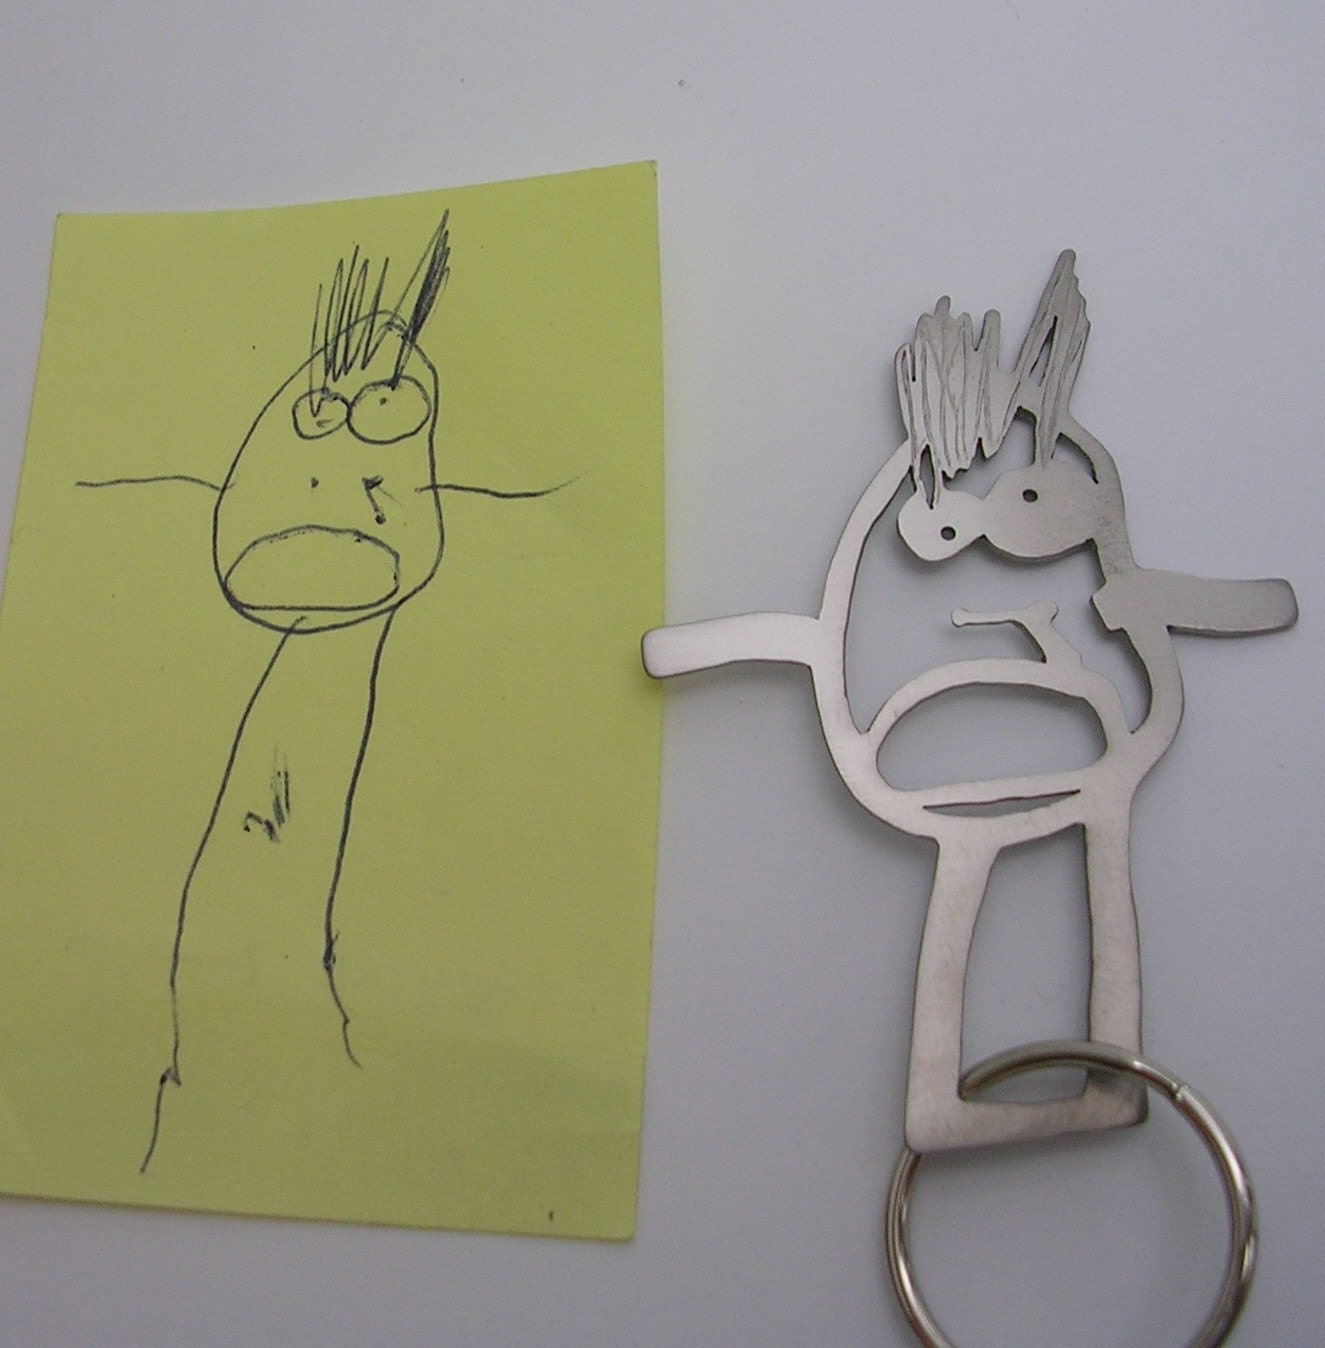 Your child's drawing on key chain for DAD